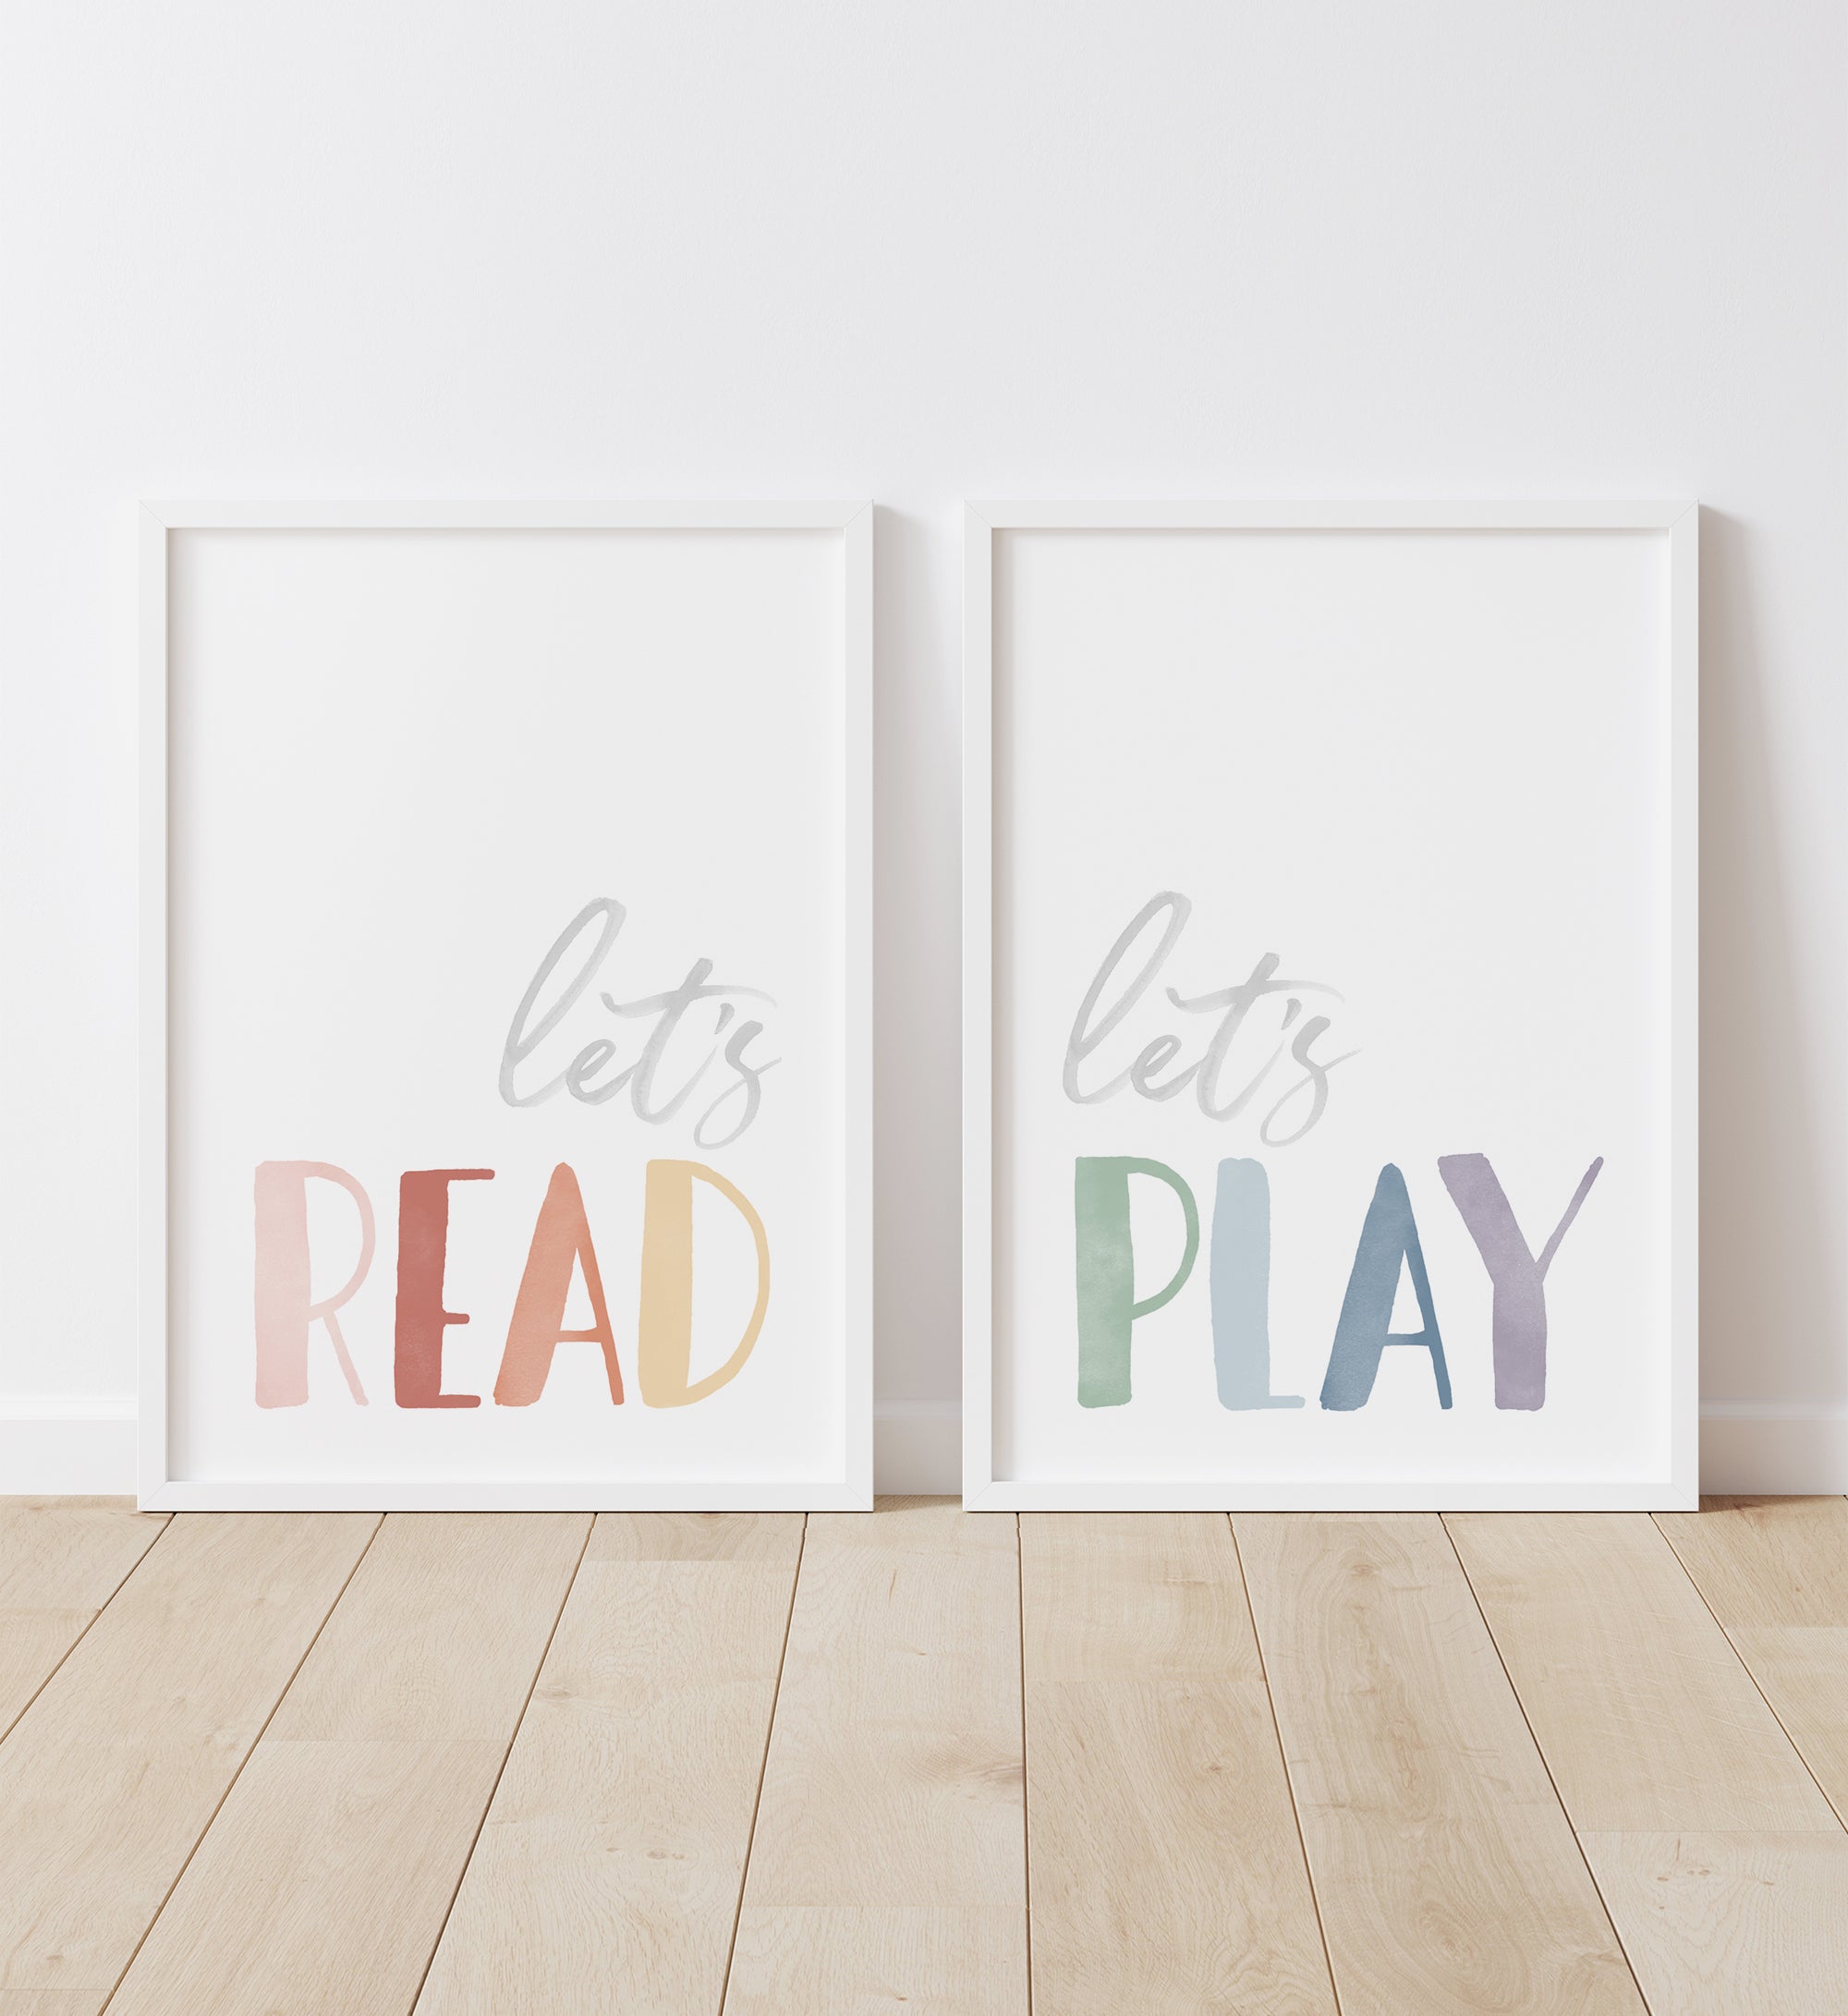 Let's Read, Let's Play Set of 2 Prints - MRCP